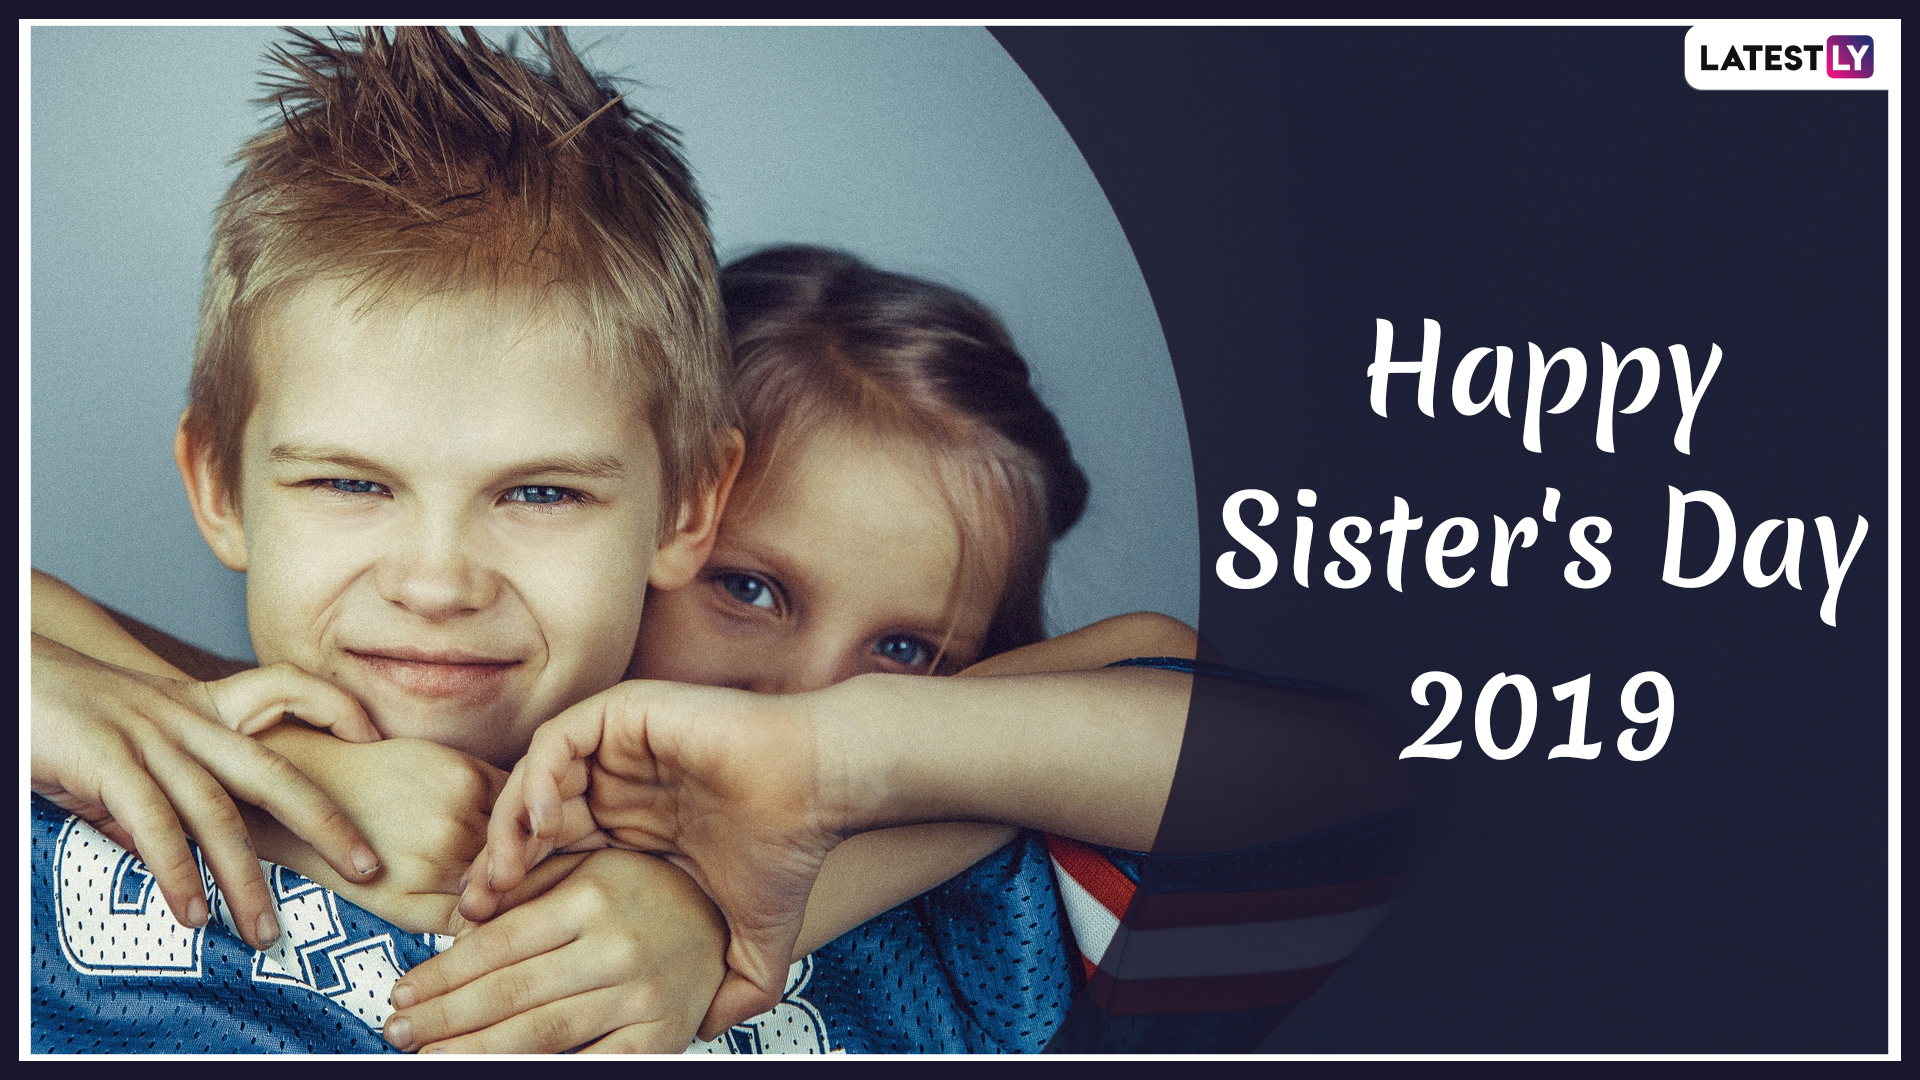 National Sisters' Day Image & HD Wallpaper for Free